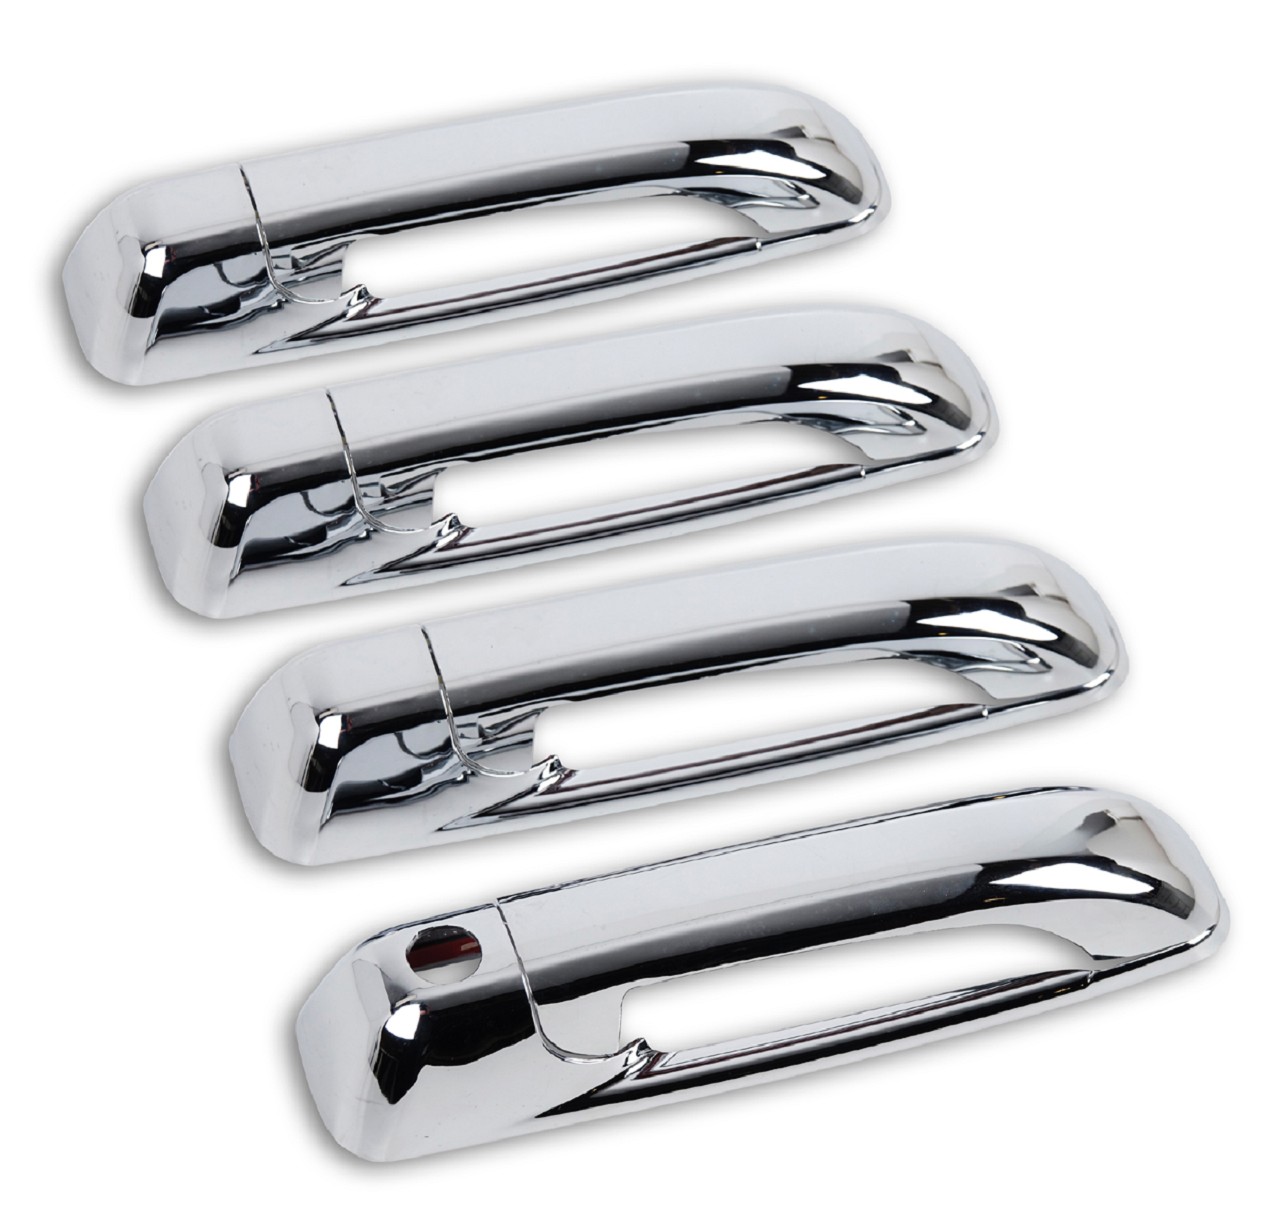 Door handle cover (set of 4) ABS plastic chrome plated fits Dodge Ram (2009-2012)